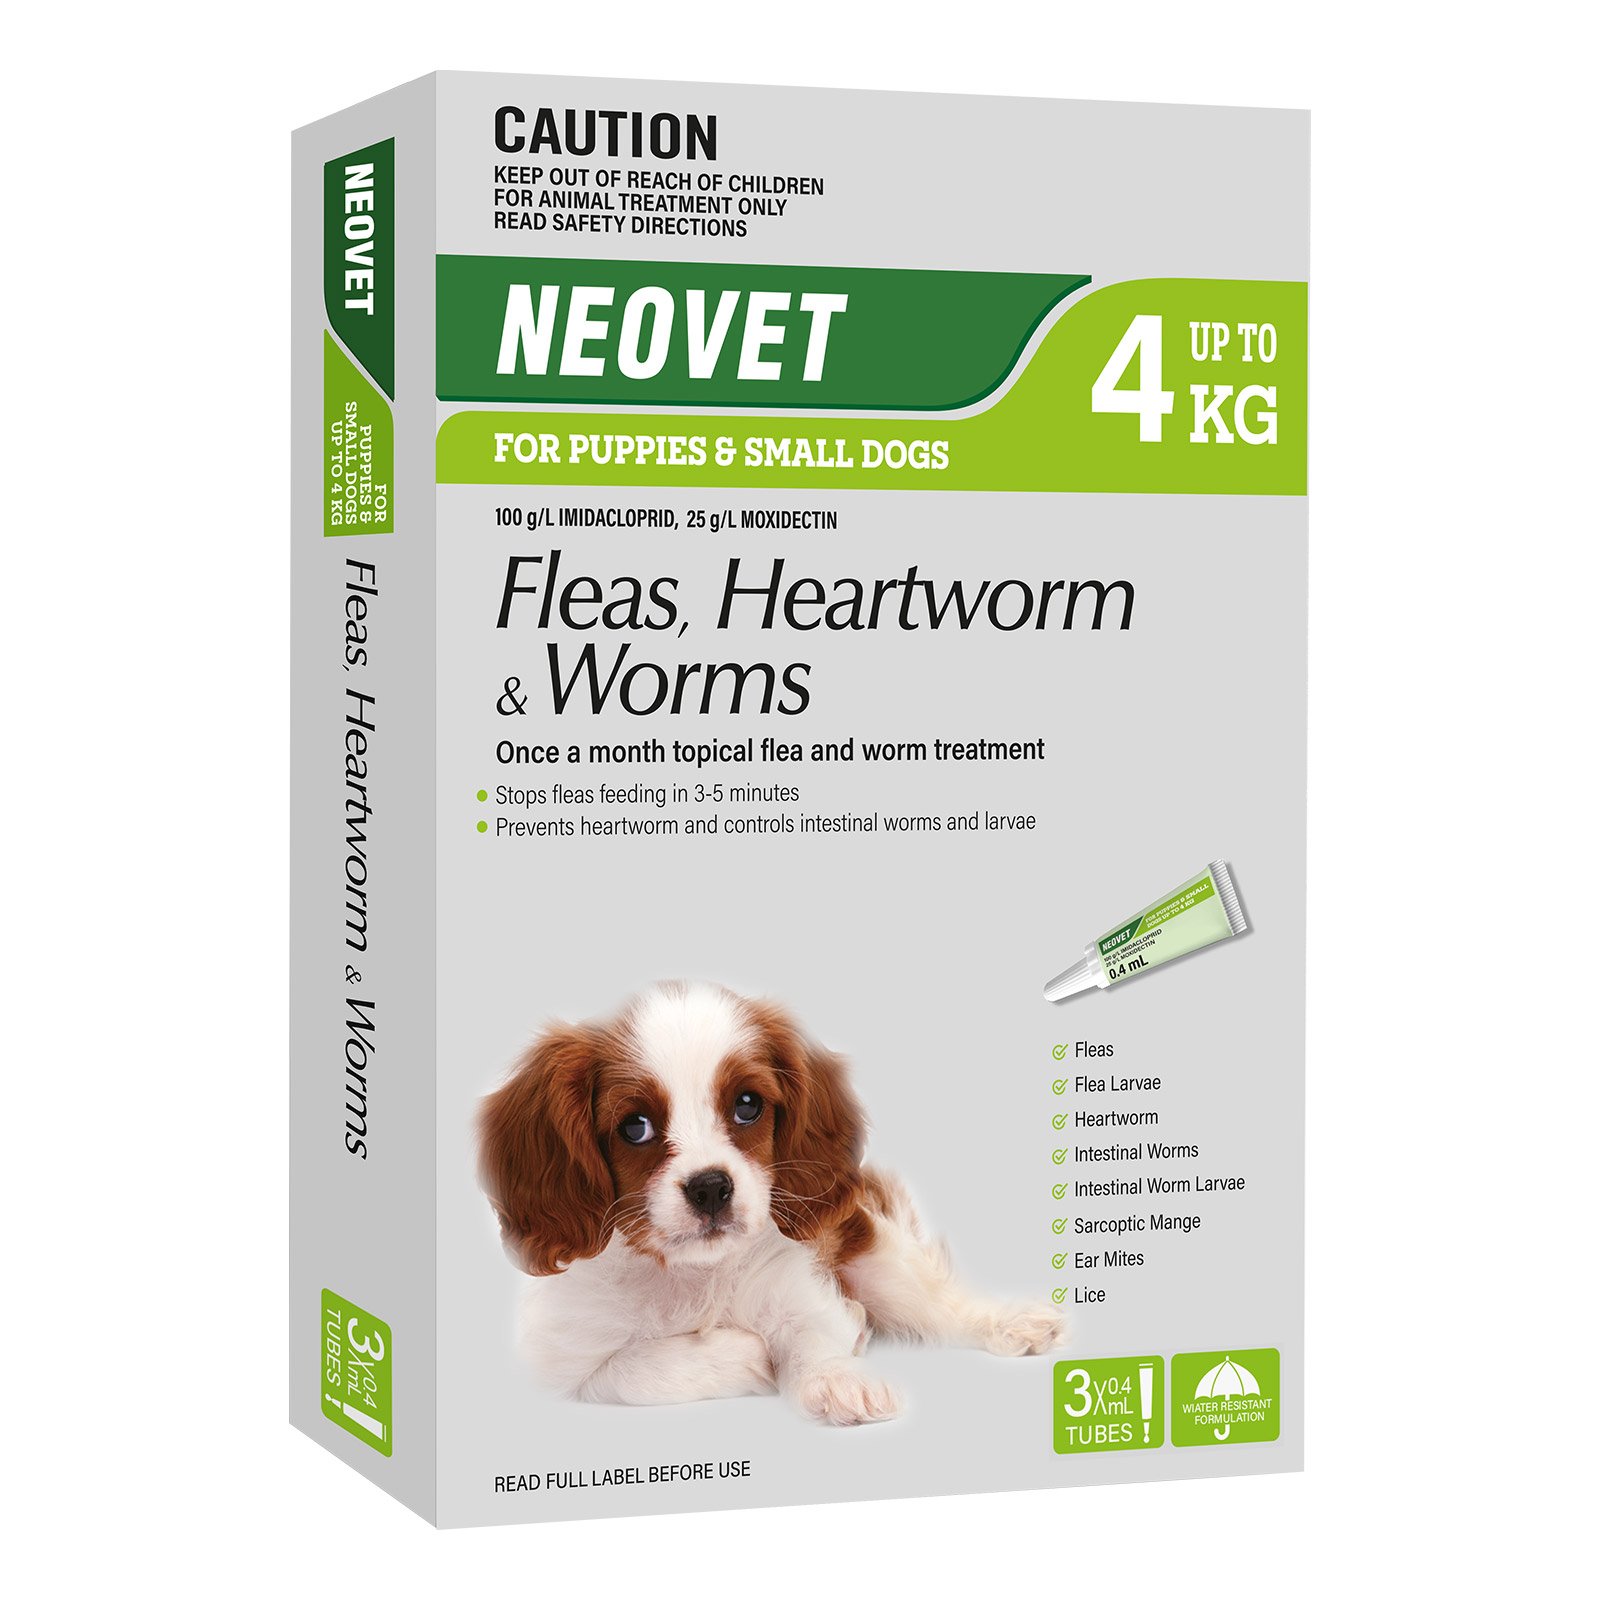 neovet-for-puppies-and-small-dogs-up-to-4kg-3tubes_08162023_021753.jpg